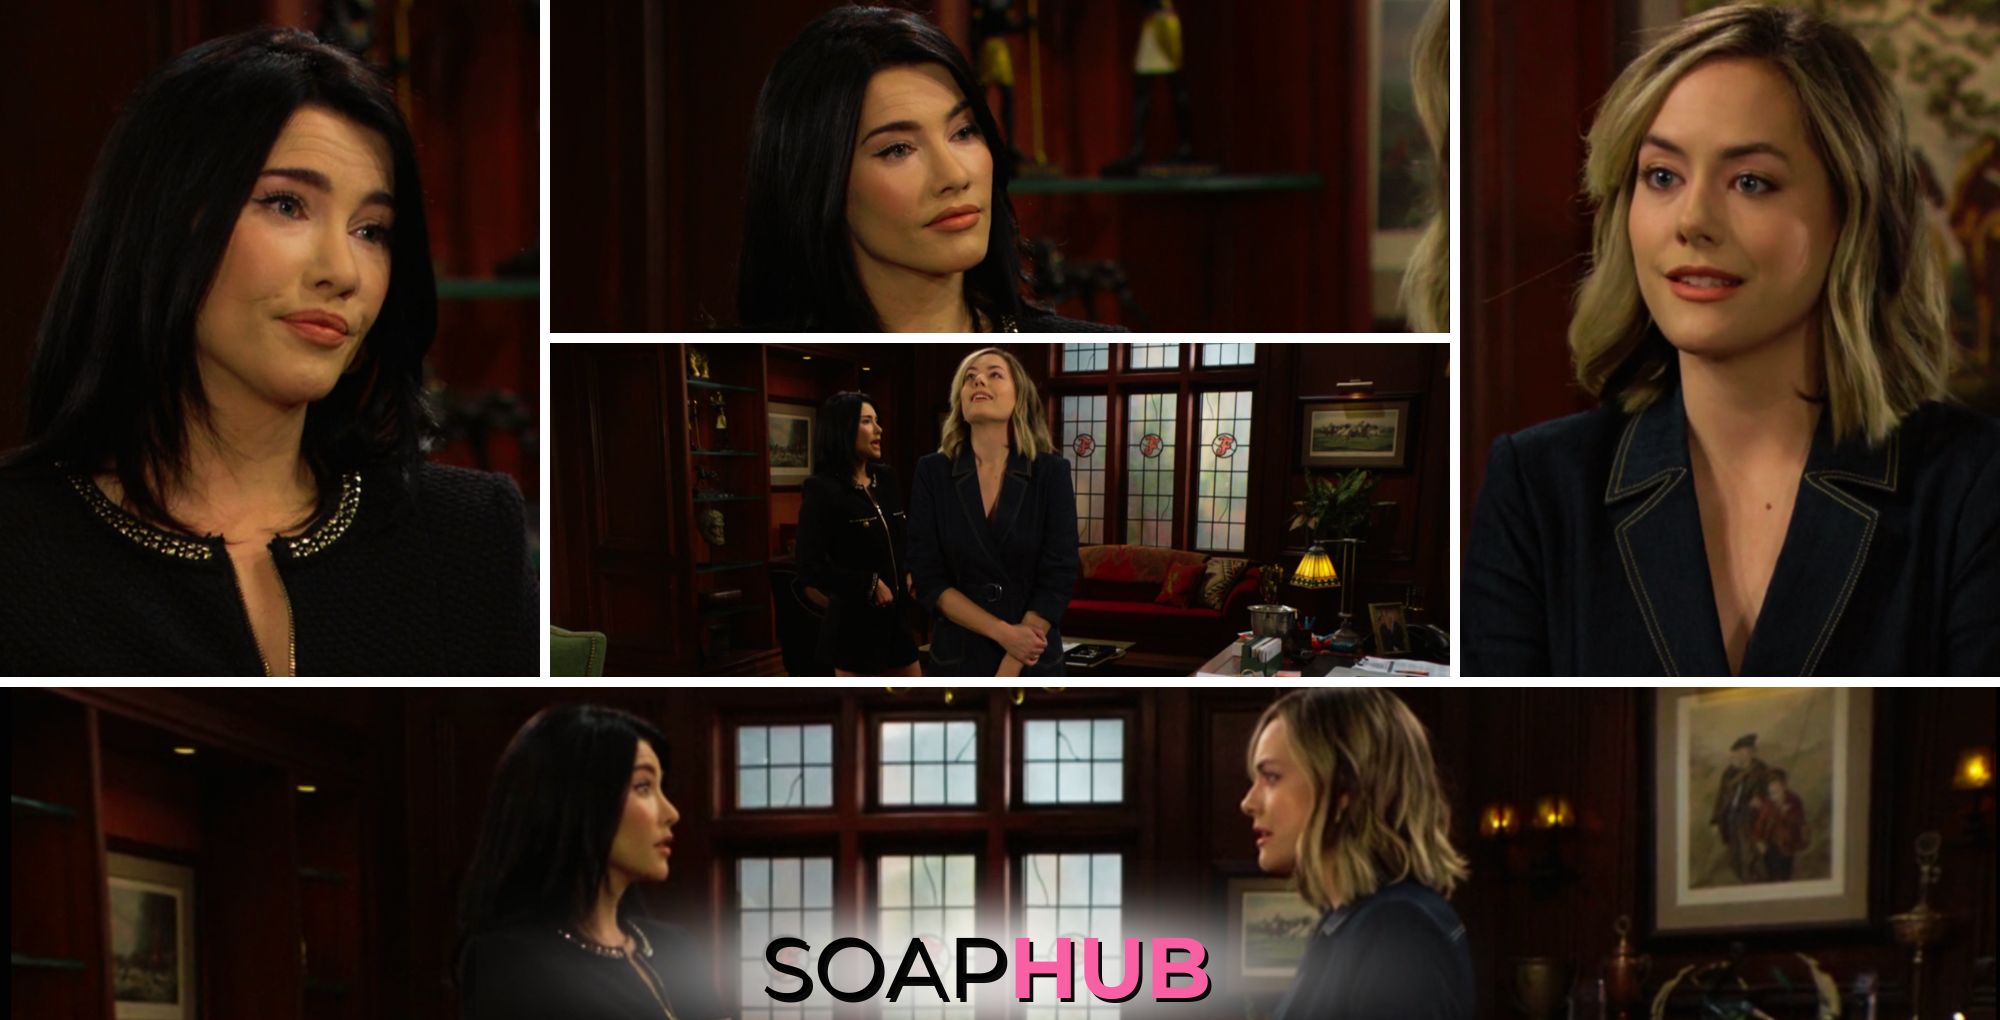 Collage from 3/20 episode of The Bold and The Beautiful featuring Hope and Steffy confrontation after Hope rejected Thomas's proposal with Soap Hub logo on the bottom